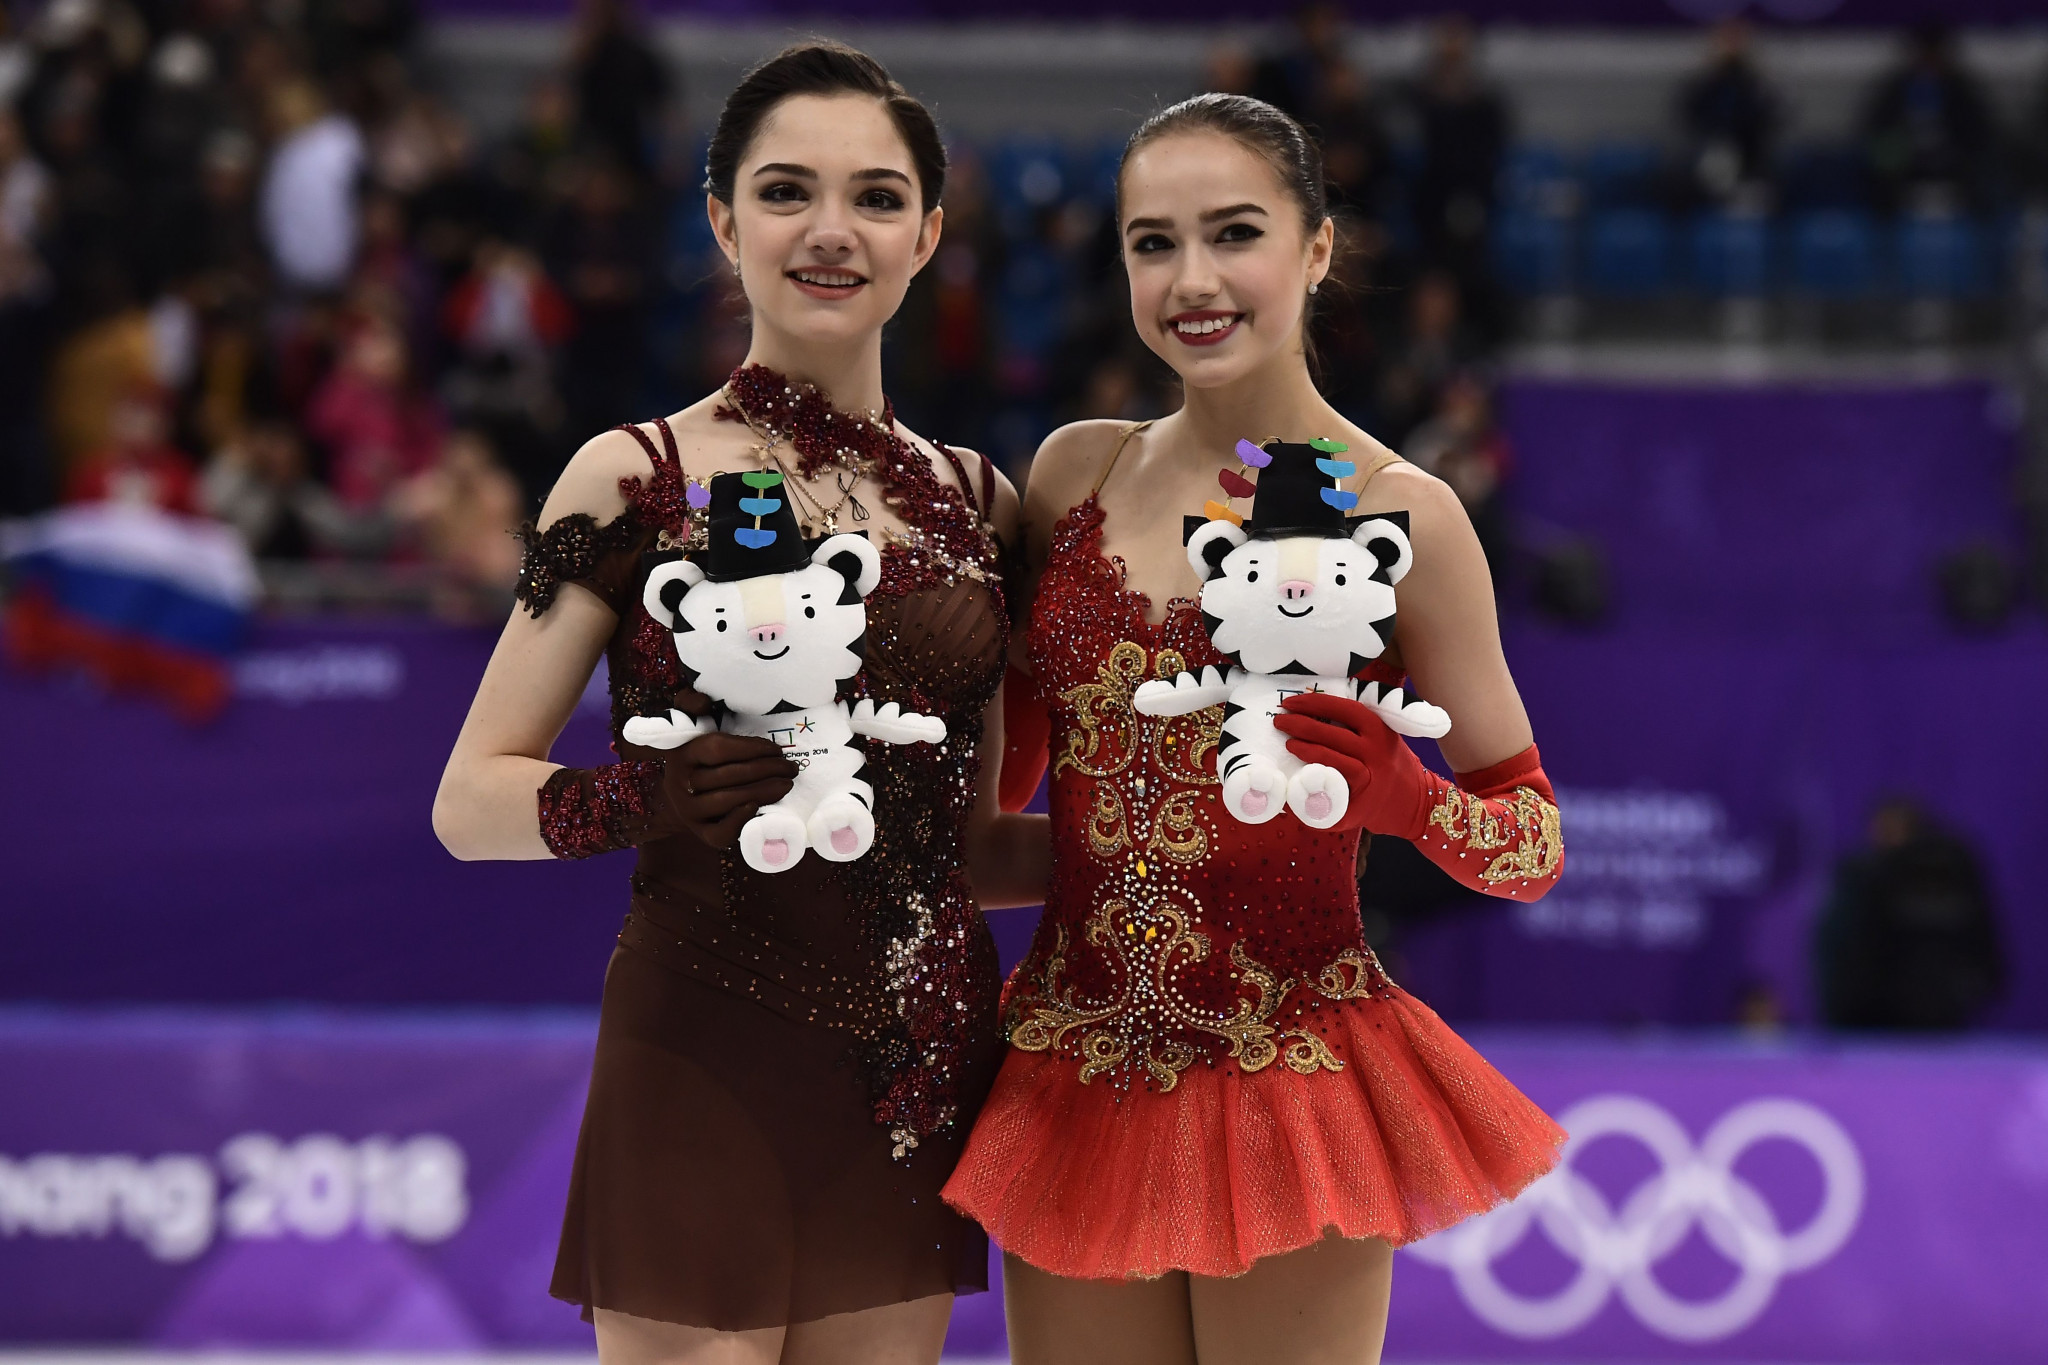 Russian pair Alina Zagitova and Evgenia Medvedeva, who train together and share the same coach, were clear favourites for the top two positions on the podium at Pyeongchang 2018 and duly delivered ©Getty Images